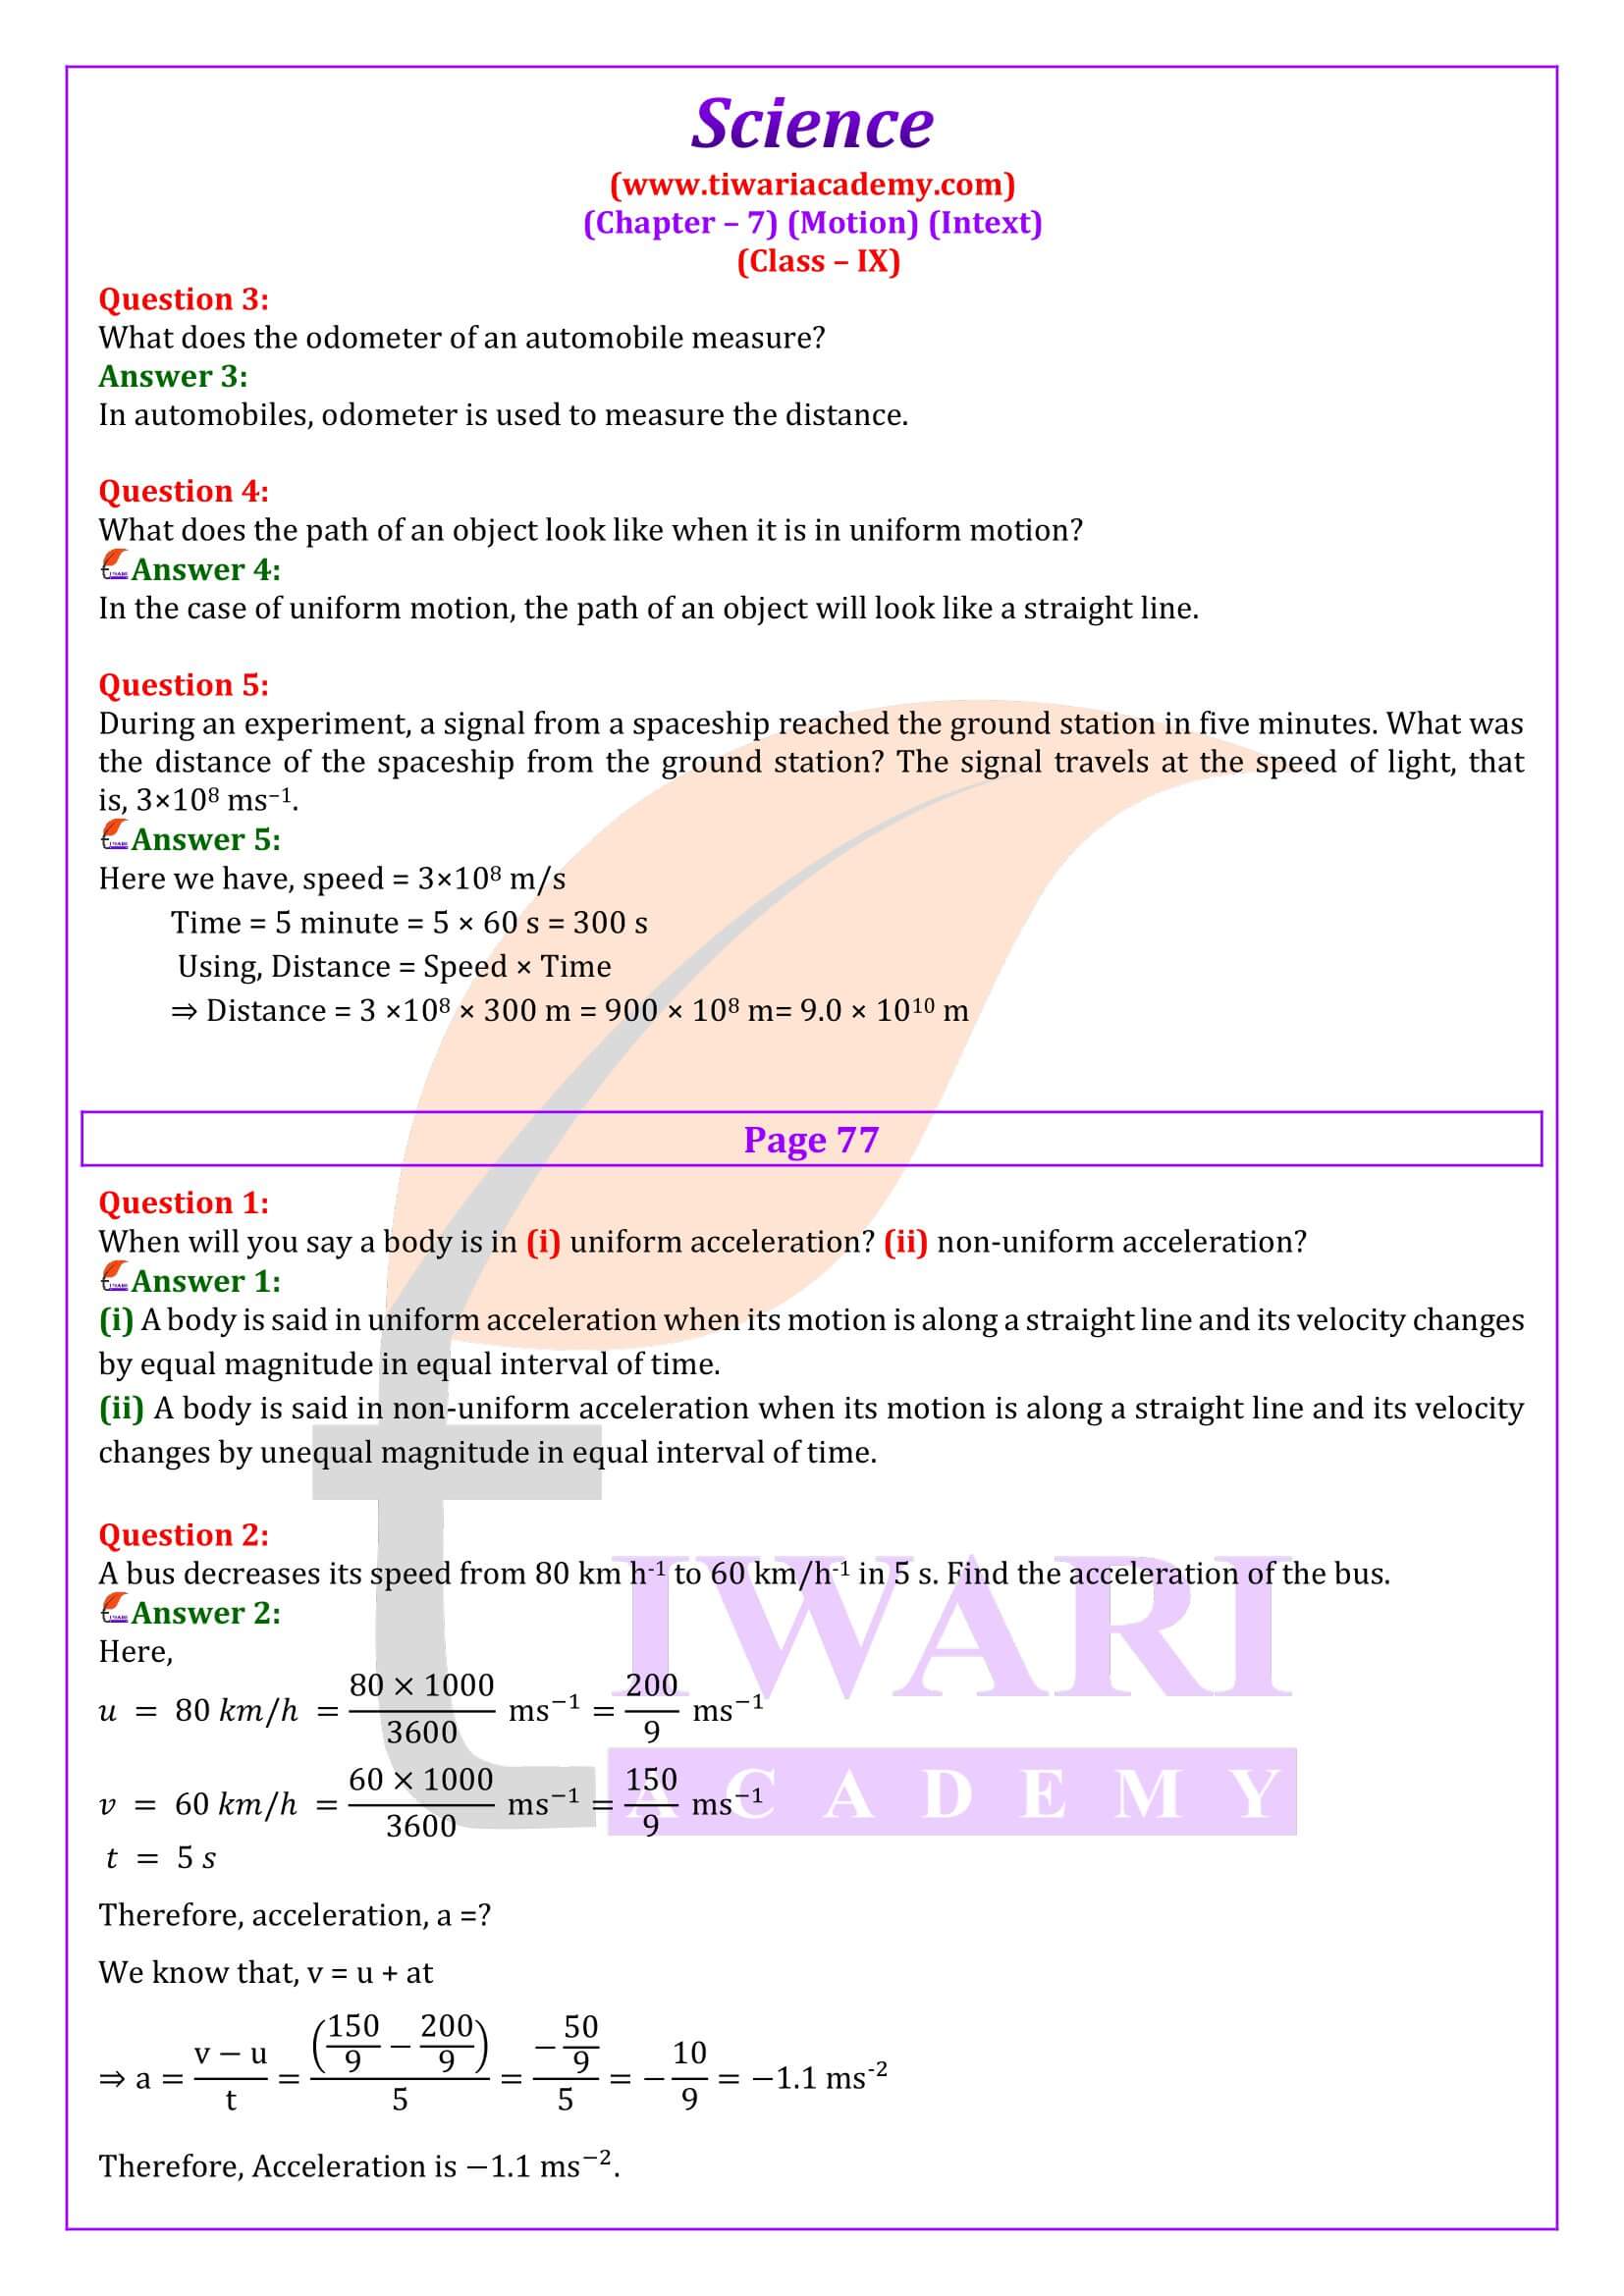 NCERT Solutions for Class 9 Science Chapter 7 Intext Answers